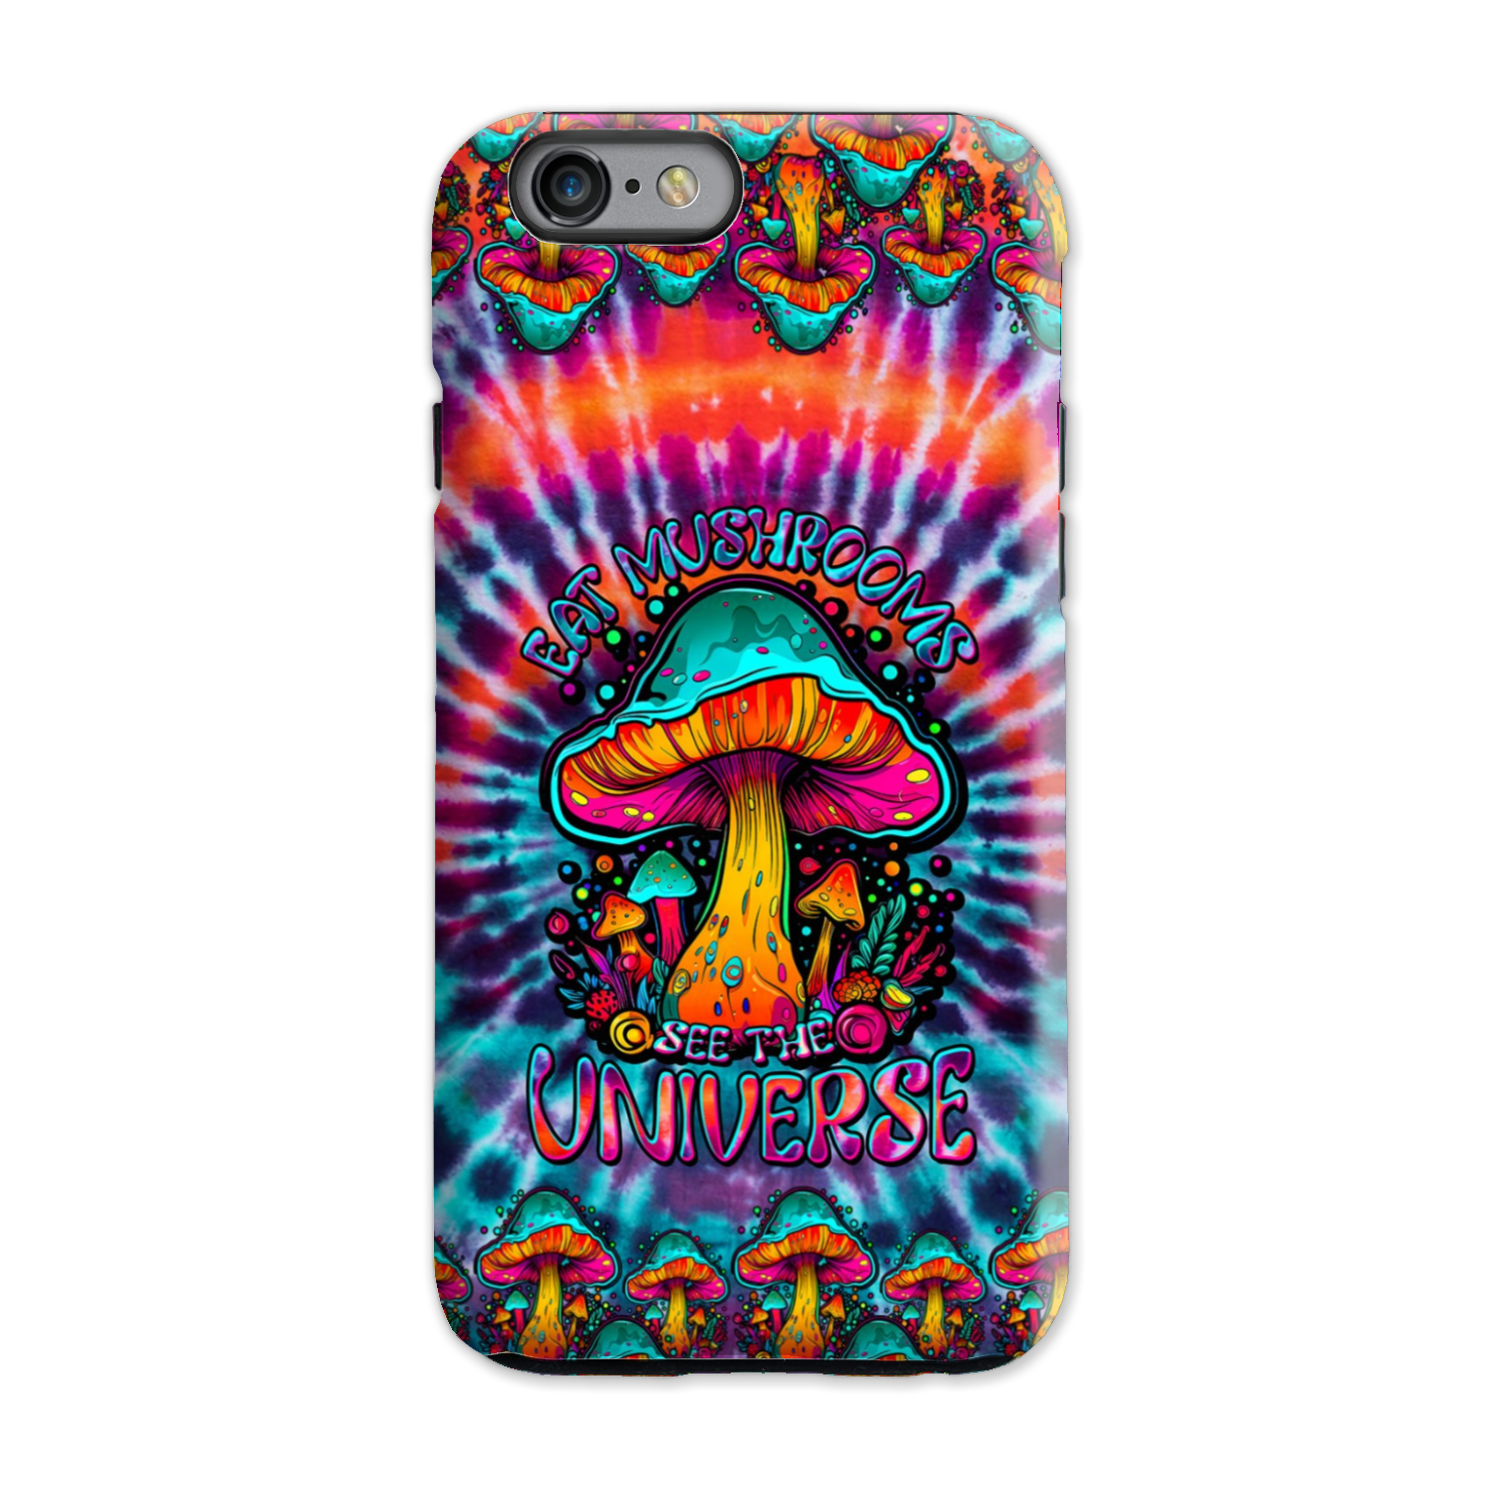 EAT MUSHROOMS SEE THE UNIVERSE TIE DYE PHONE CASE - TLTW2707233